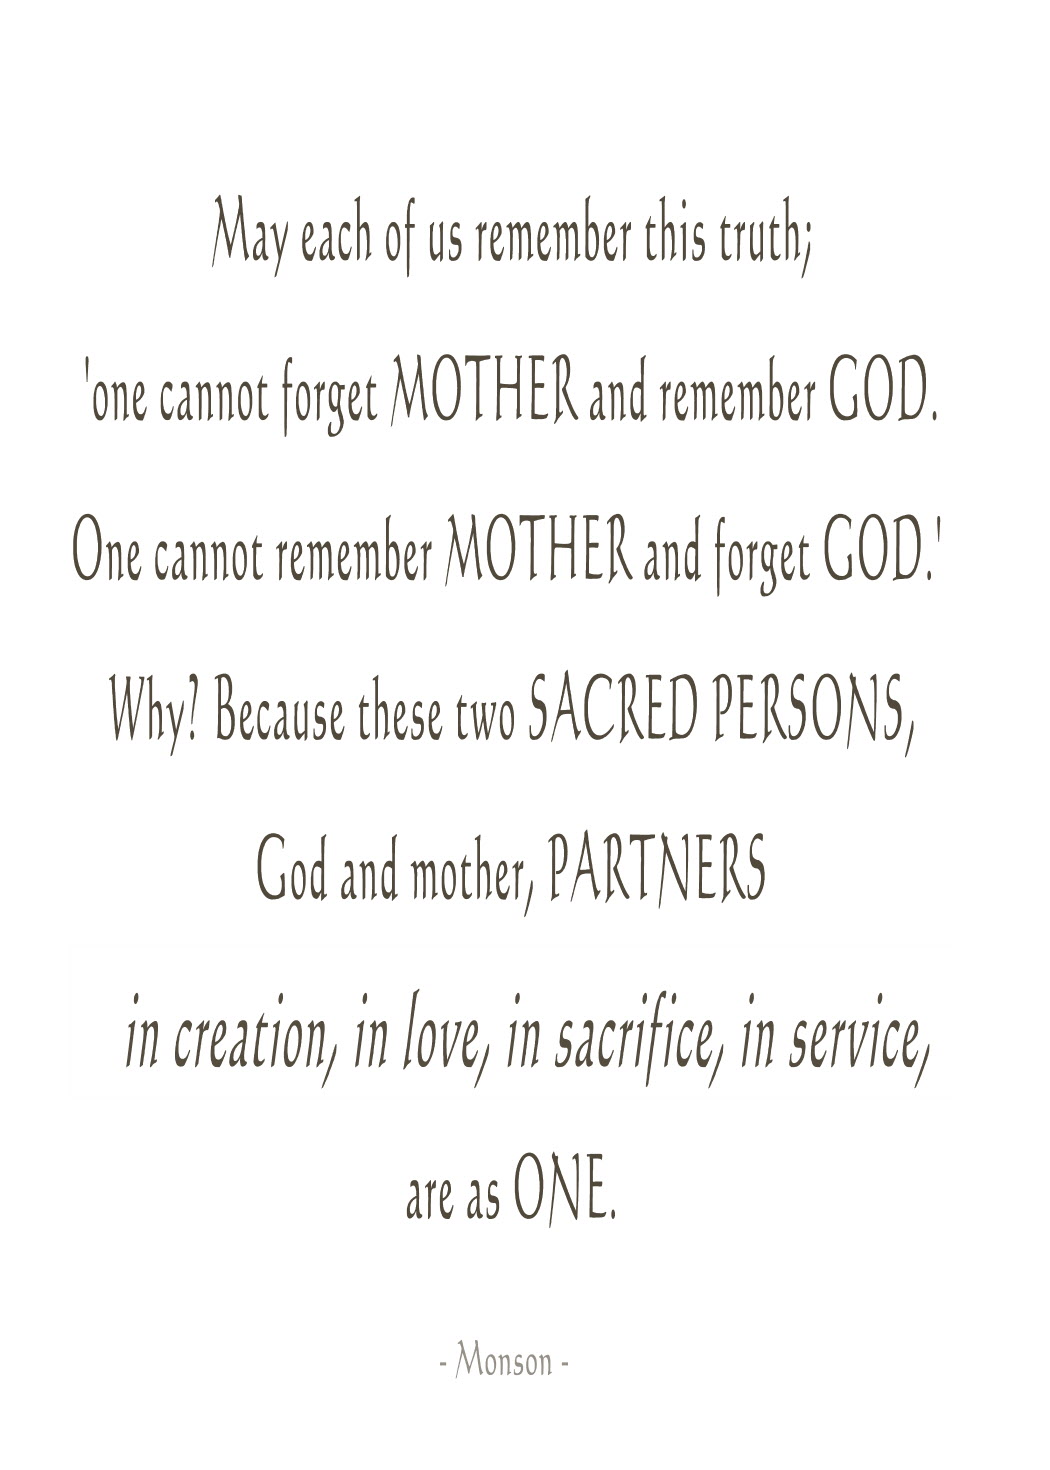 May each of us treasure this truth. One cannot forget mother and remember God. One cannot remember mother and forget God. Why1 Because these two sacred ... Monson